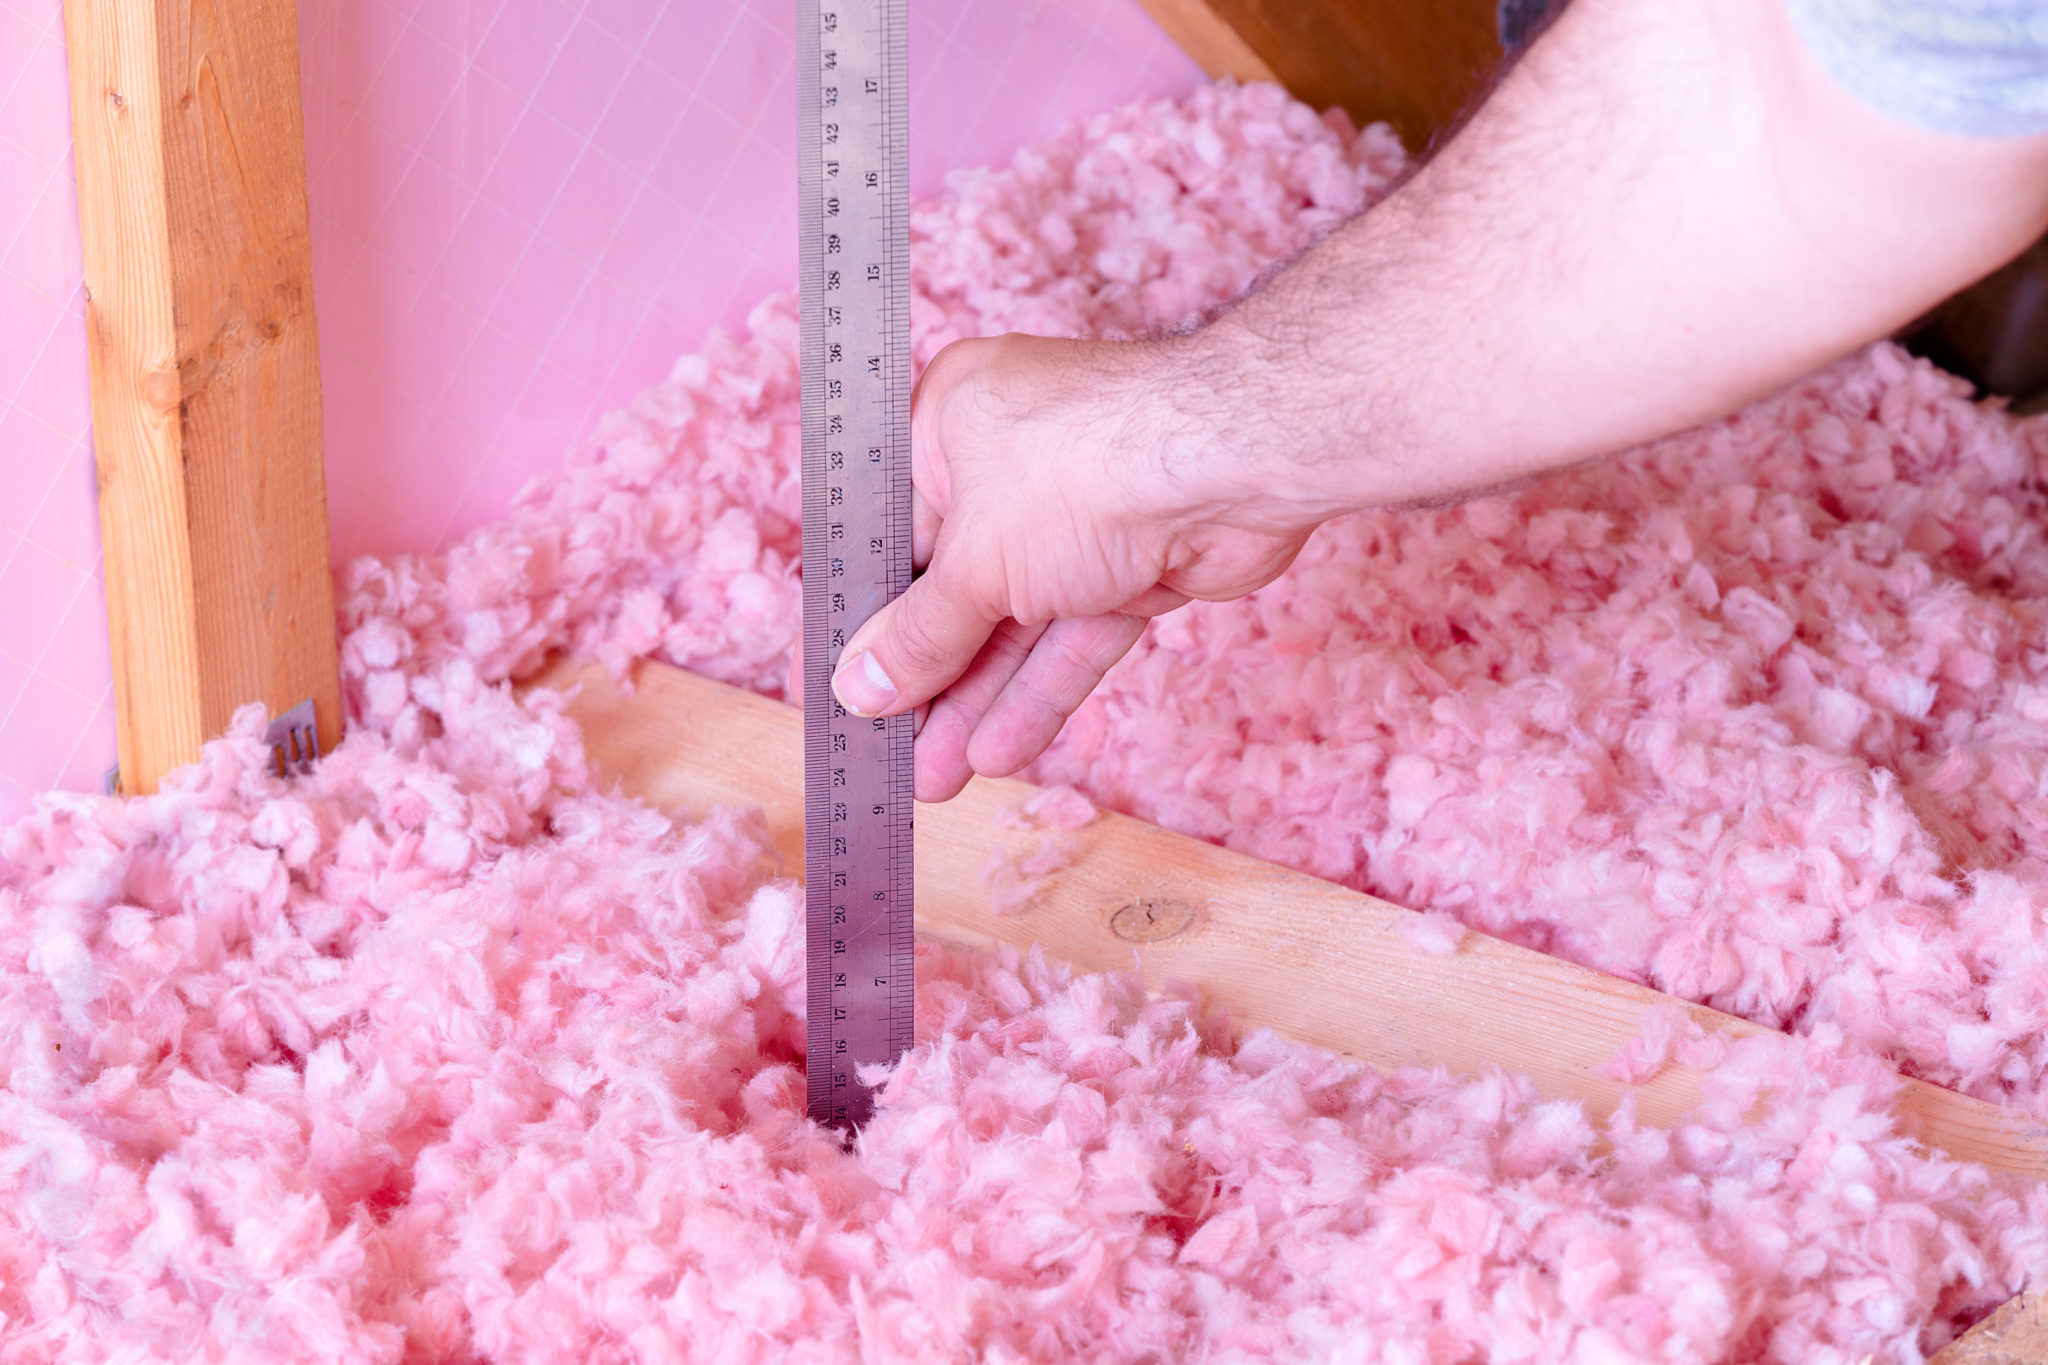 attic Insulation being measured